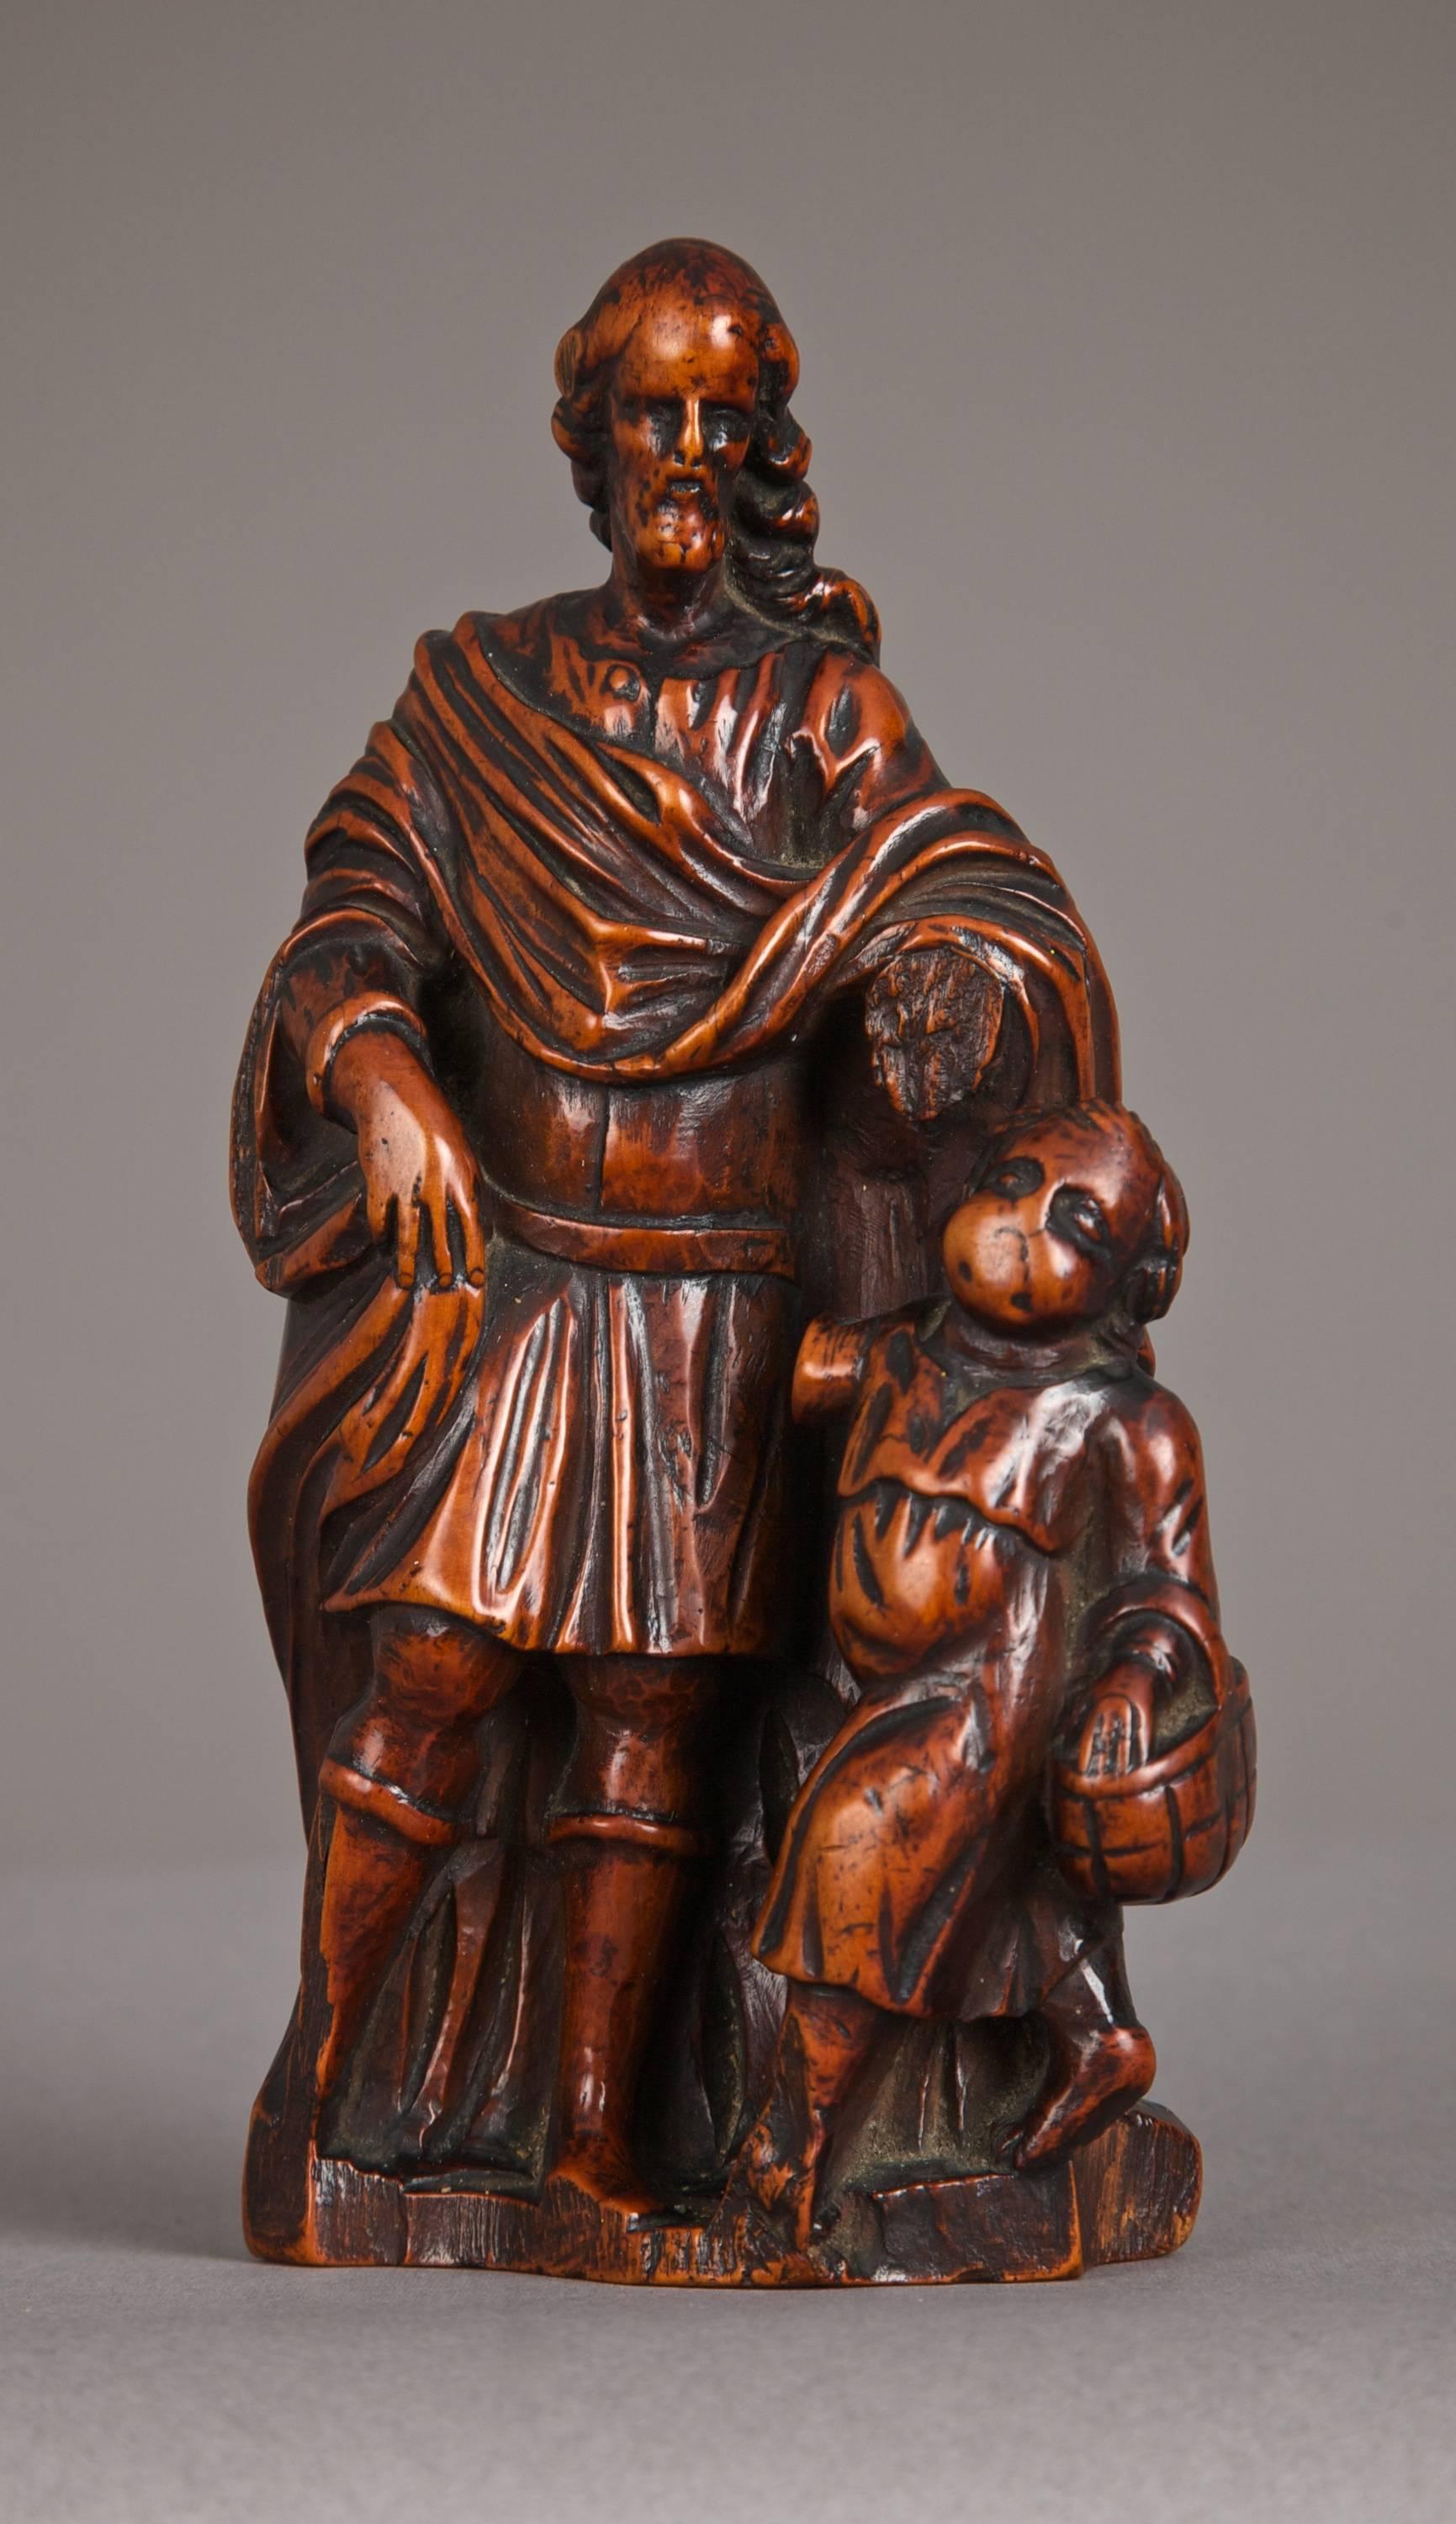 Late 16th century boxwood carving of St Joseph, circa 1580-1600.

The highly patinated figure of St Joseph with the infant Christ carrying a basket, carved from the solid in high relief. From the Flemish city of Antwerp.

This small boxwood